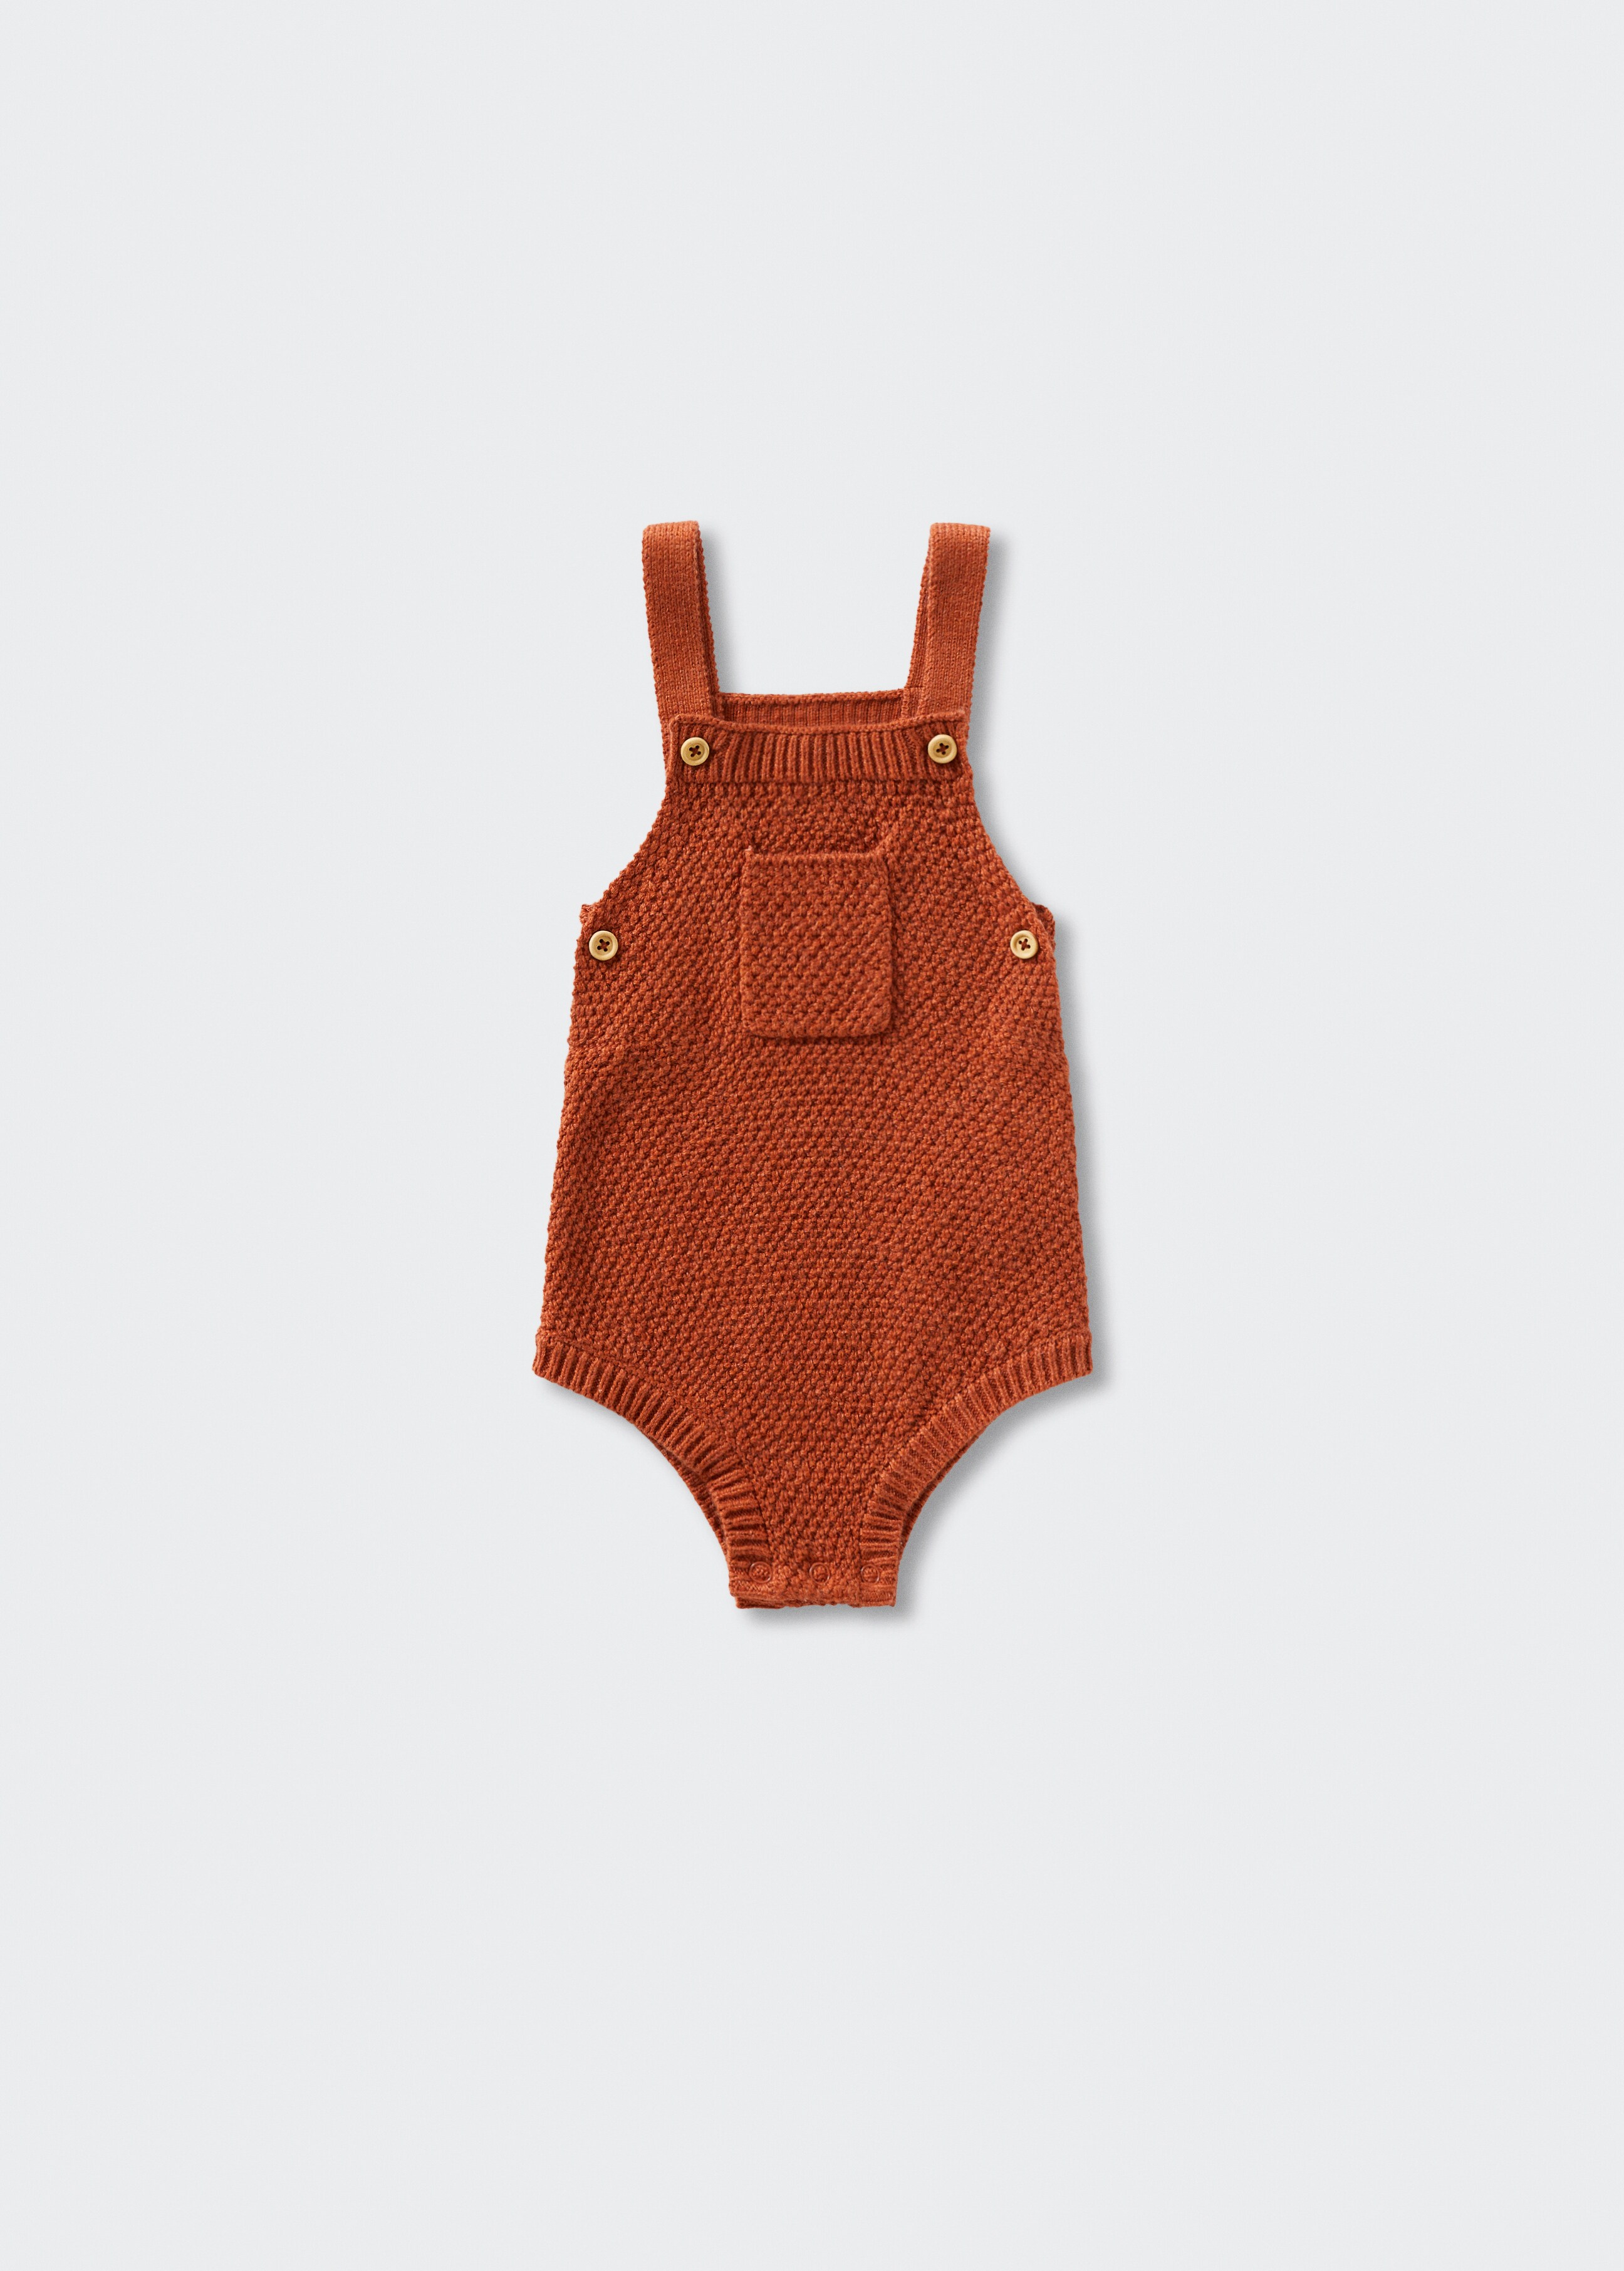 Cotton knit dungarees - Article without model